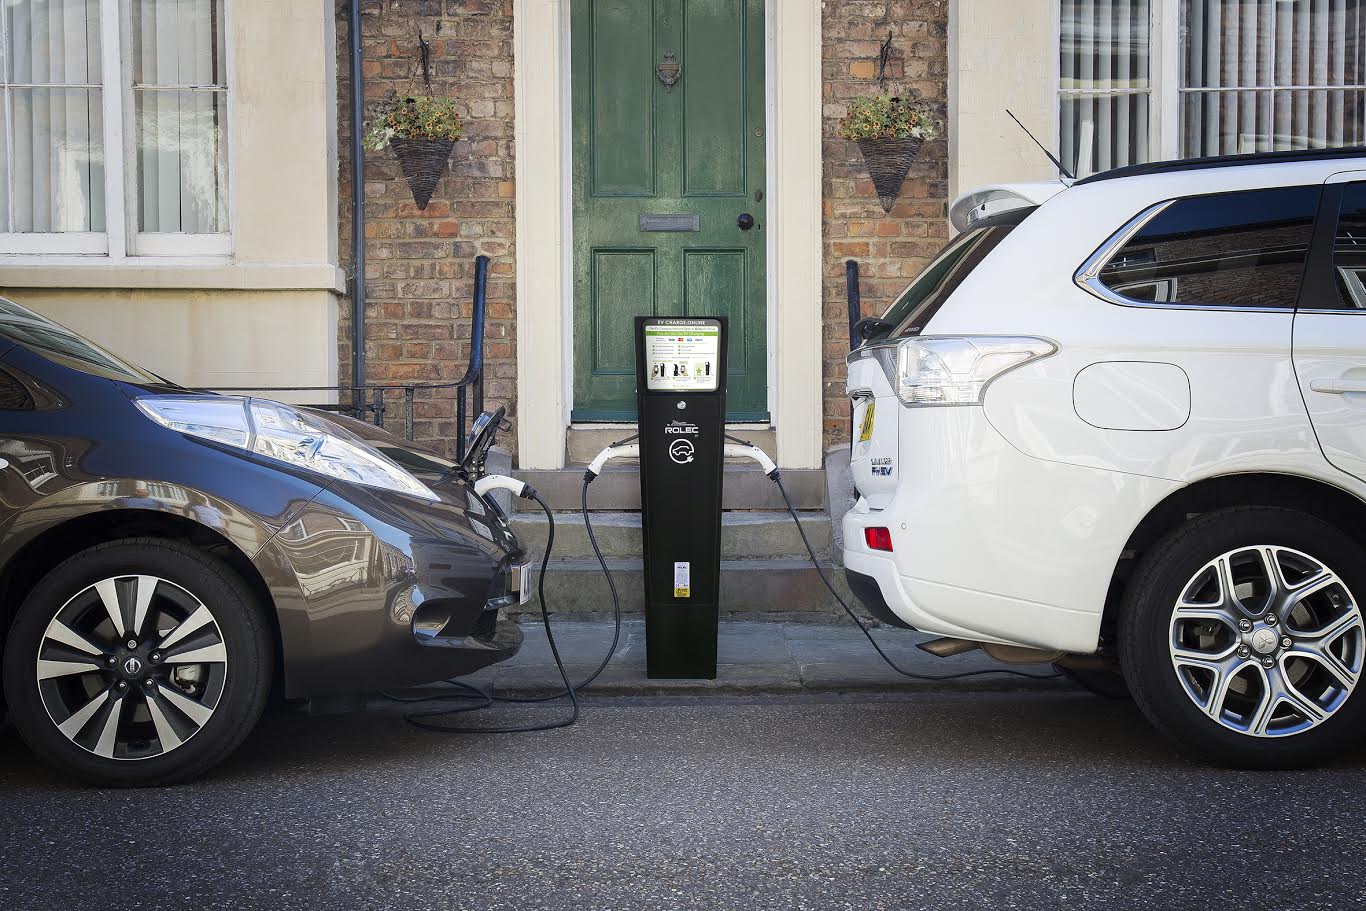 WHY ARE ELECTRIC CARS THE ENEMIES OF THE ENVIRONMENT?